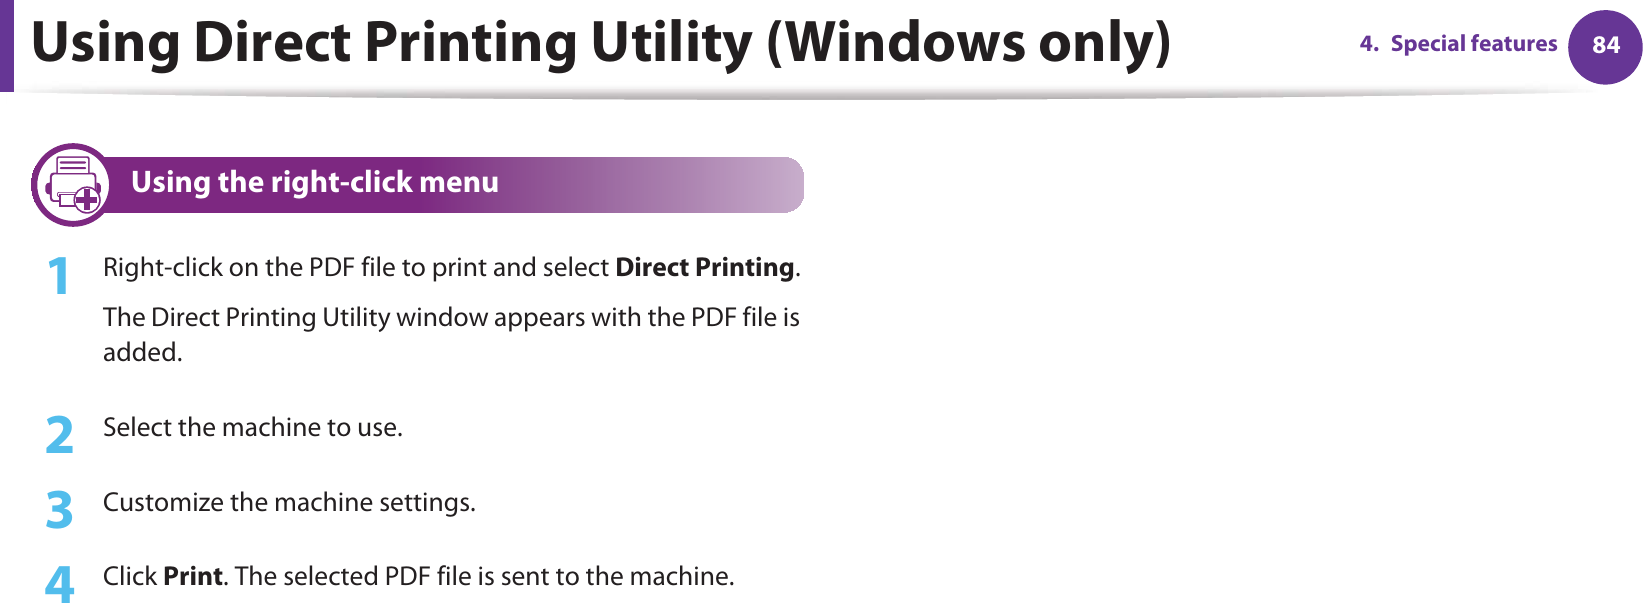 Using Direct Printing Utility (Windows only) 844. Special features5 Using the right-click menu1Right-click on the PDF file to print and select Direct Printing.The Direct Printing Utility window appears with the PDF file is added.2  Select the machine to use.3  Customize the machine settings. 4  Click Print. The selected PDF file is sent to the machine.